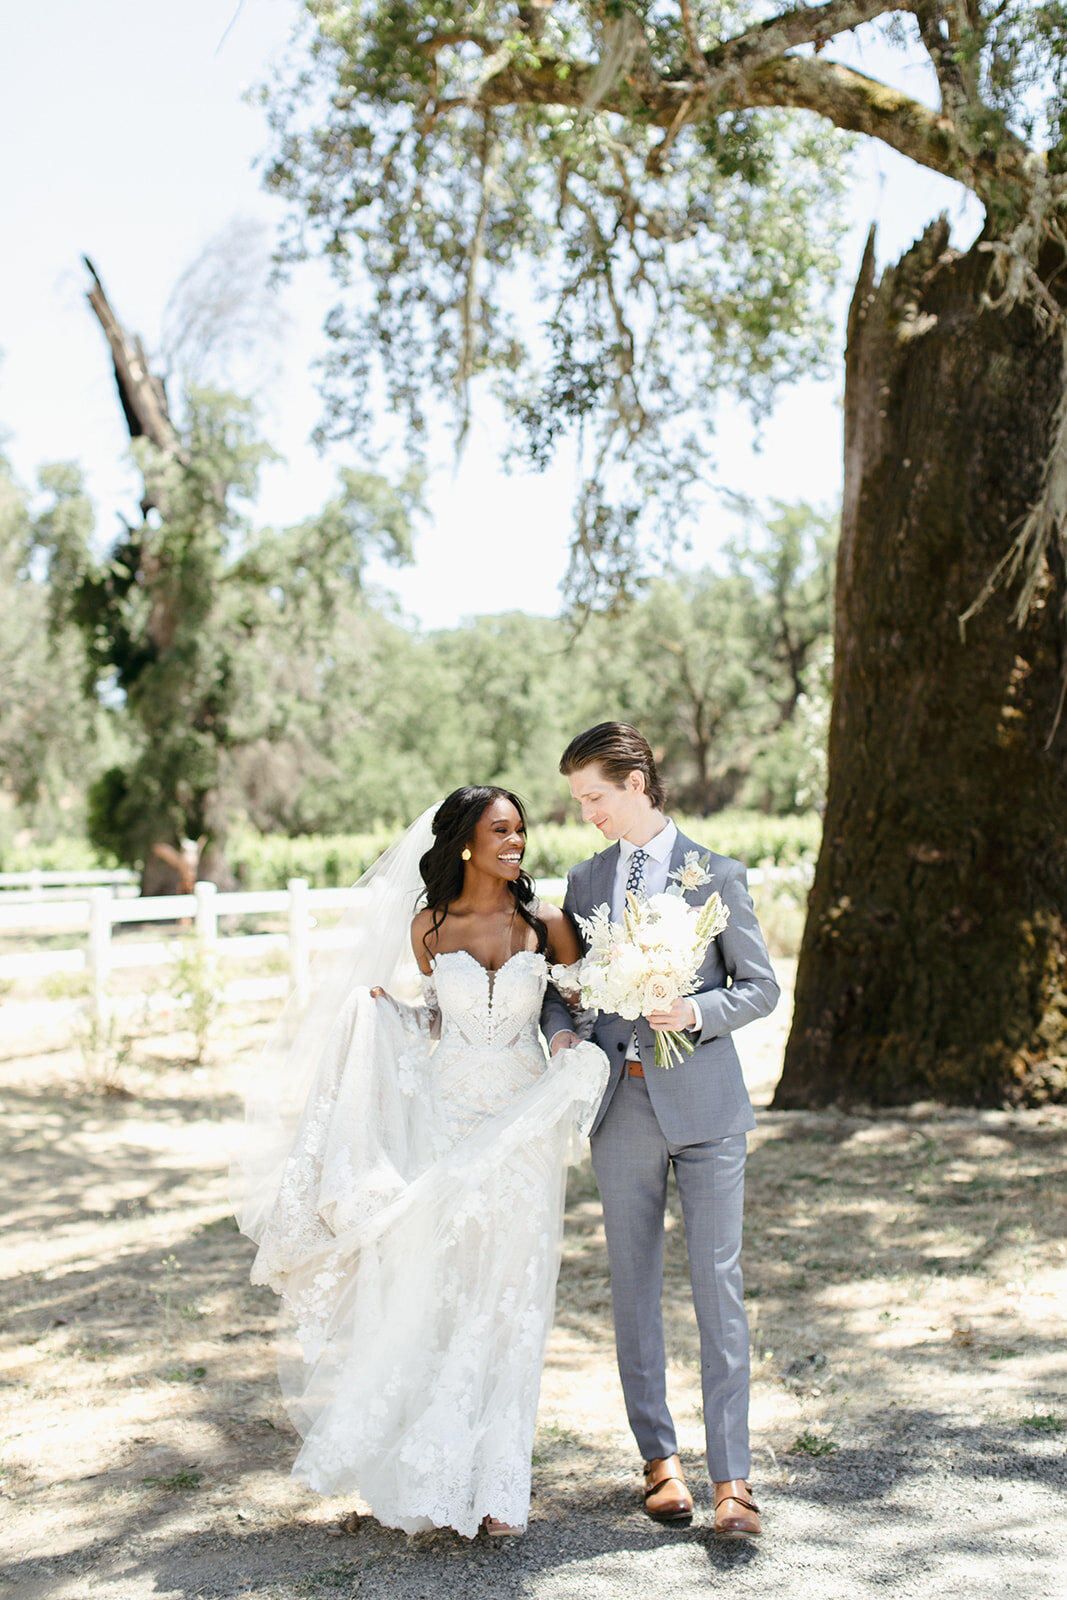 Bride and groom laugh as they walk together under large tree in Calistoga, California.